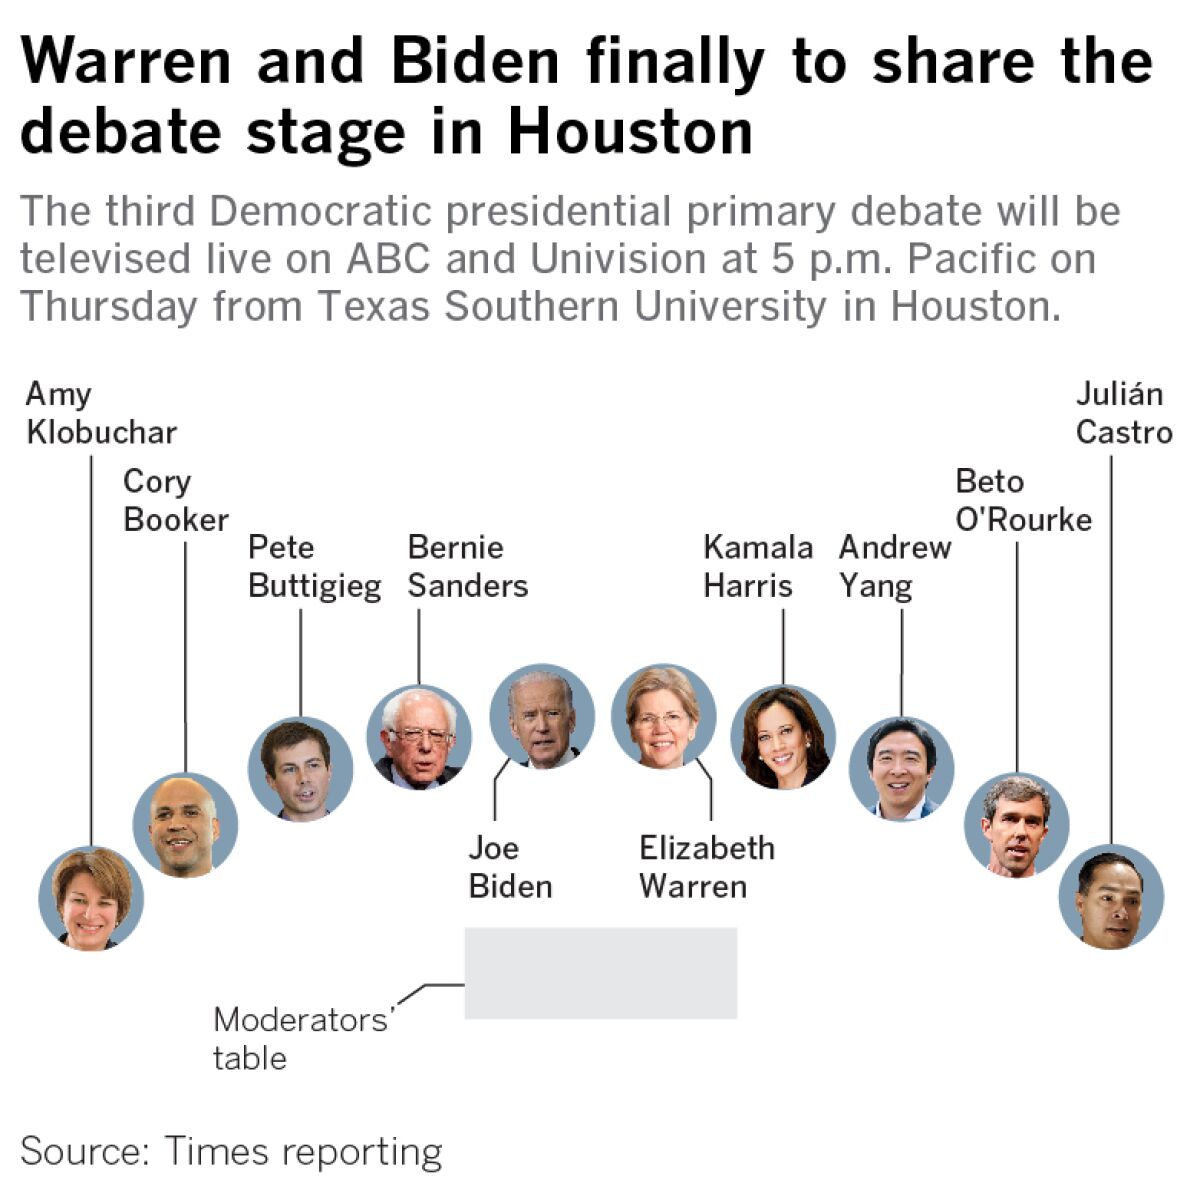 Warren and Biden finally to share the debate stage in Houston. The third Democratic presidential primary debate will be televised live on ABC and Univision at 5 p.m. Pacific on Thursday from Texas Southern University in Houston.